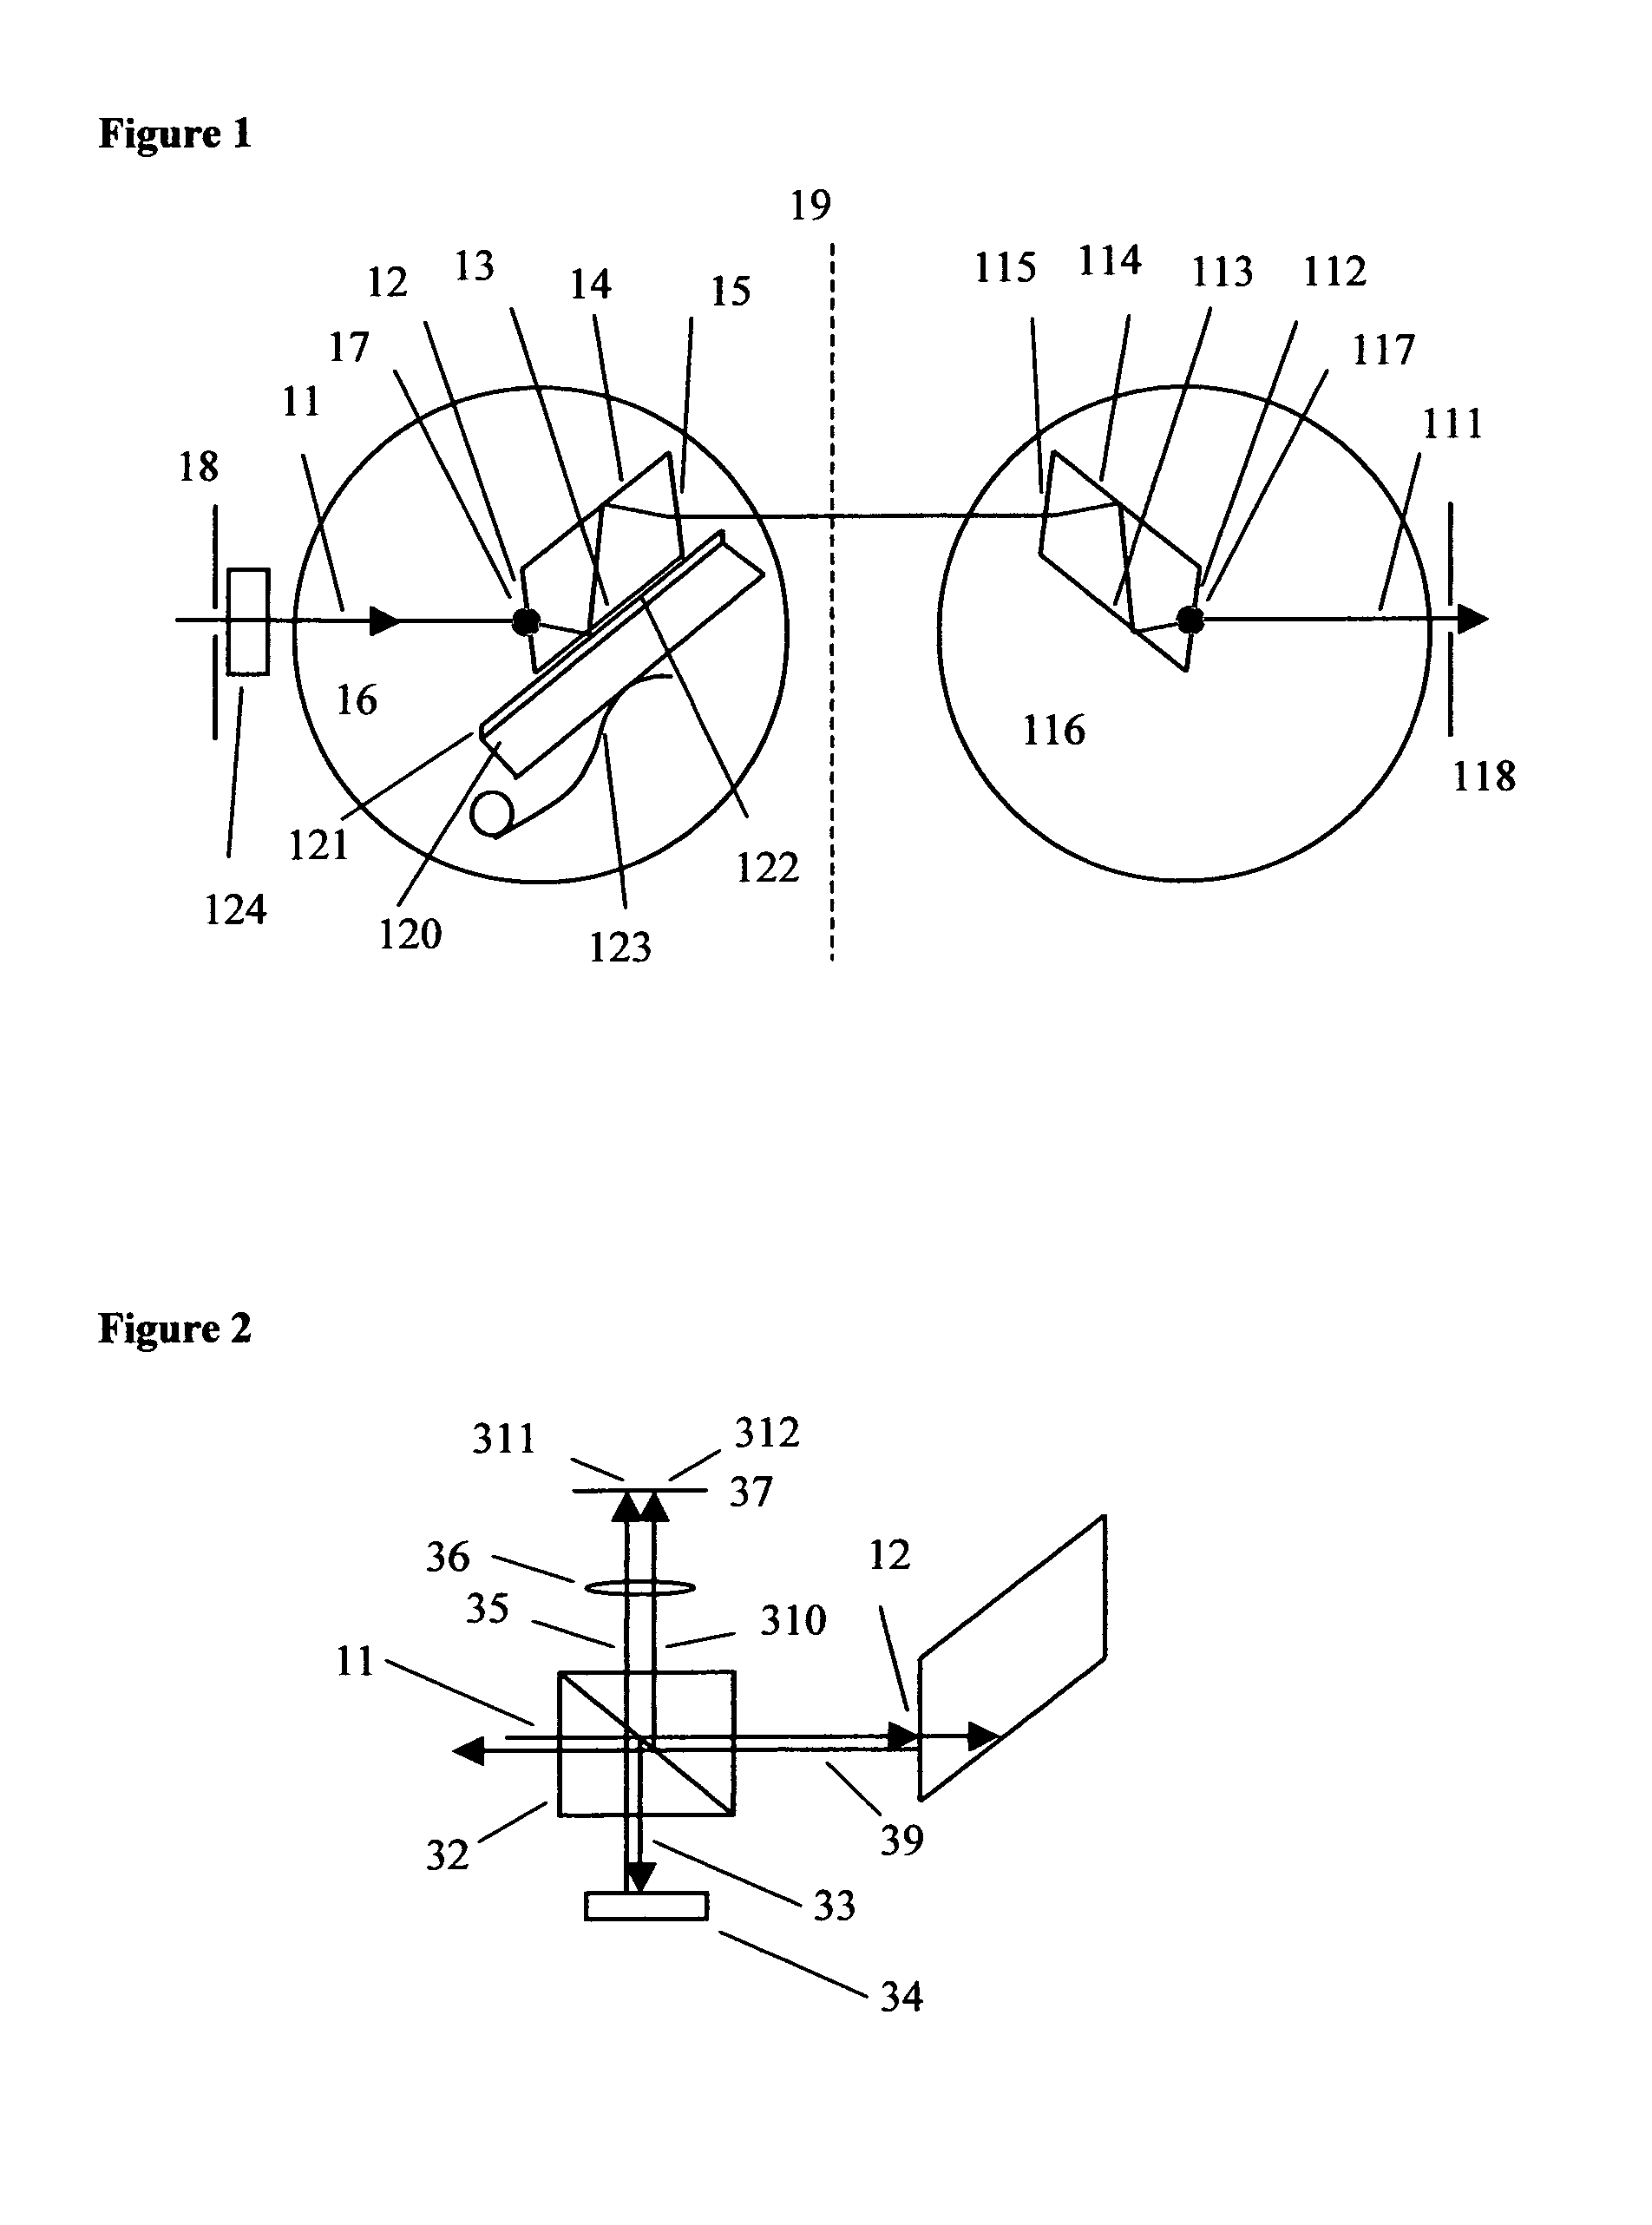 Apparatus for measuring thin film refractive index and thickness with a spectrophotometer